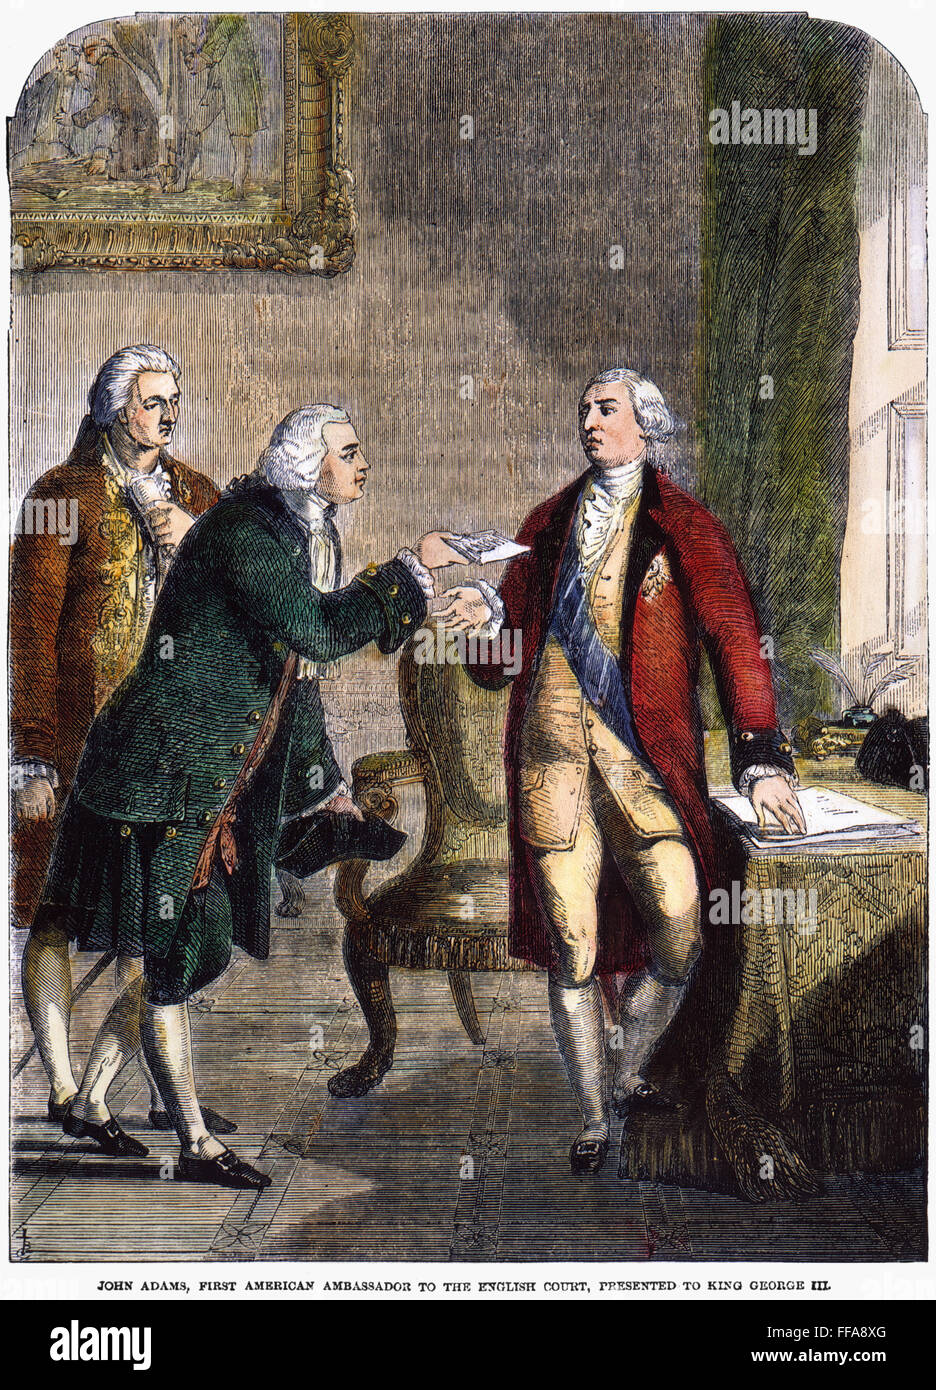 JOHN ADAMS (1735-1826) /npresented to King George III, in 1785, as first American ambassador to the English court: wood engraving, 19th century. Stock Photo